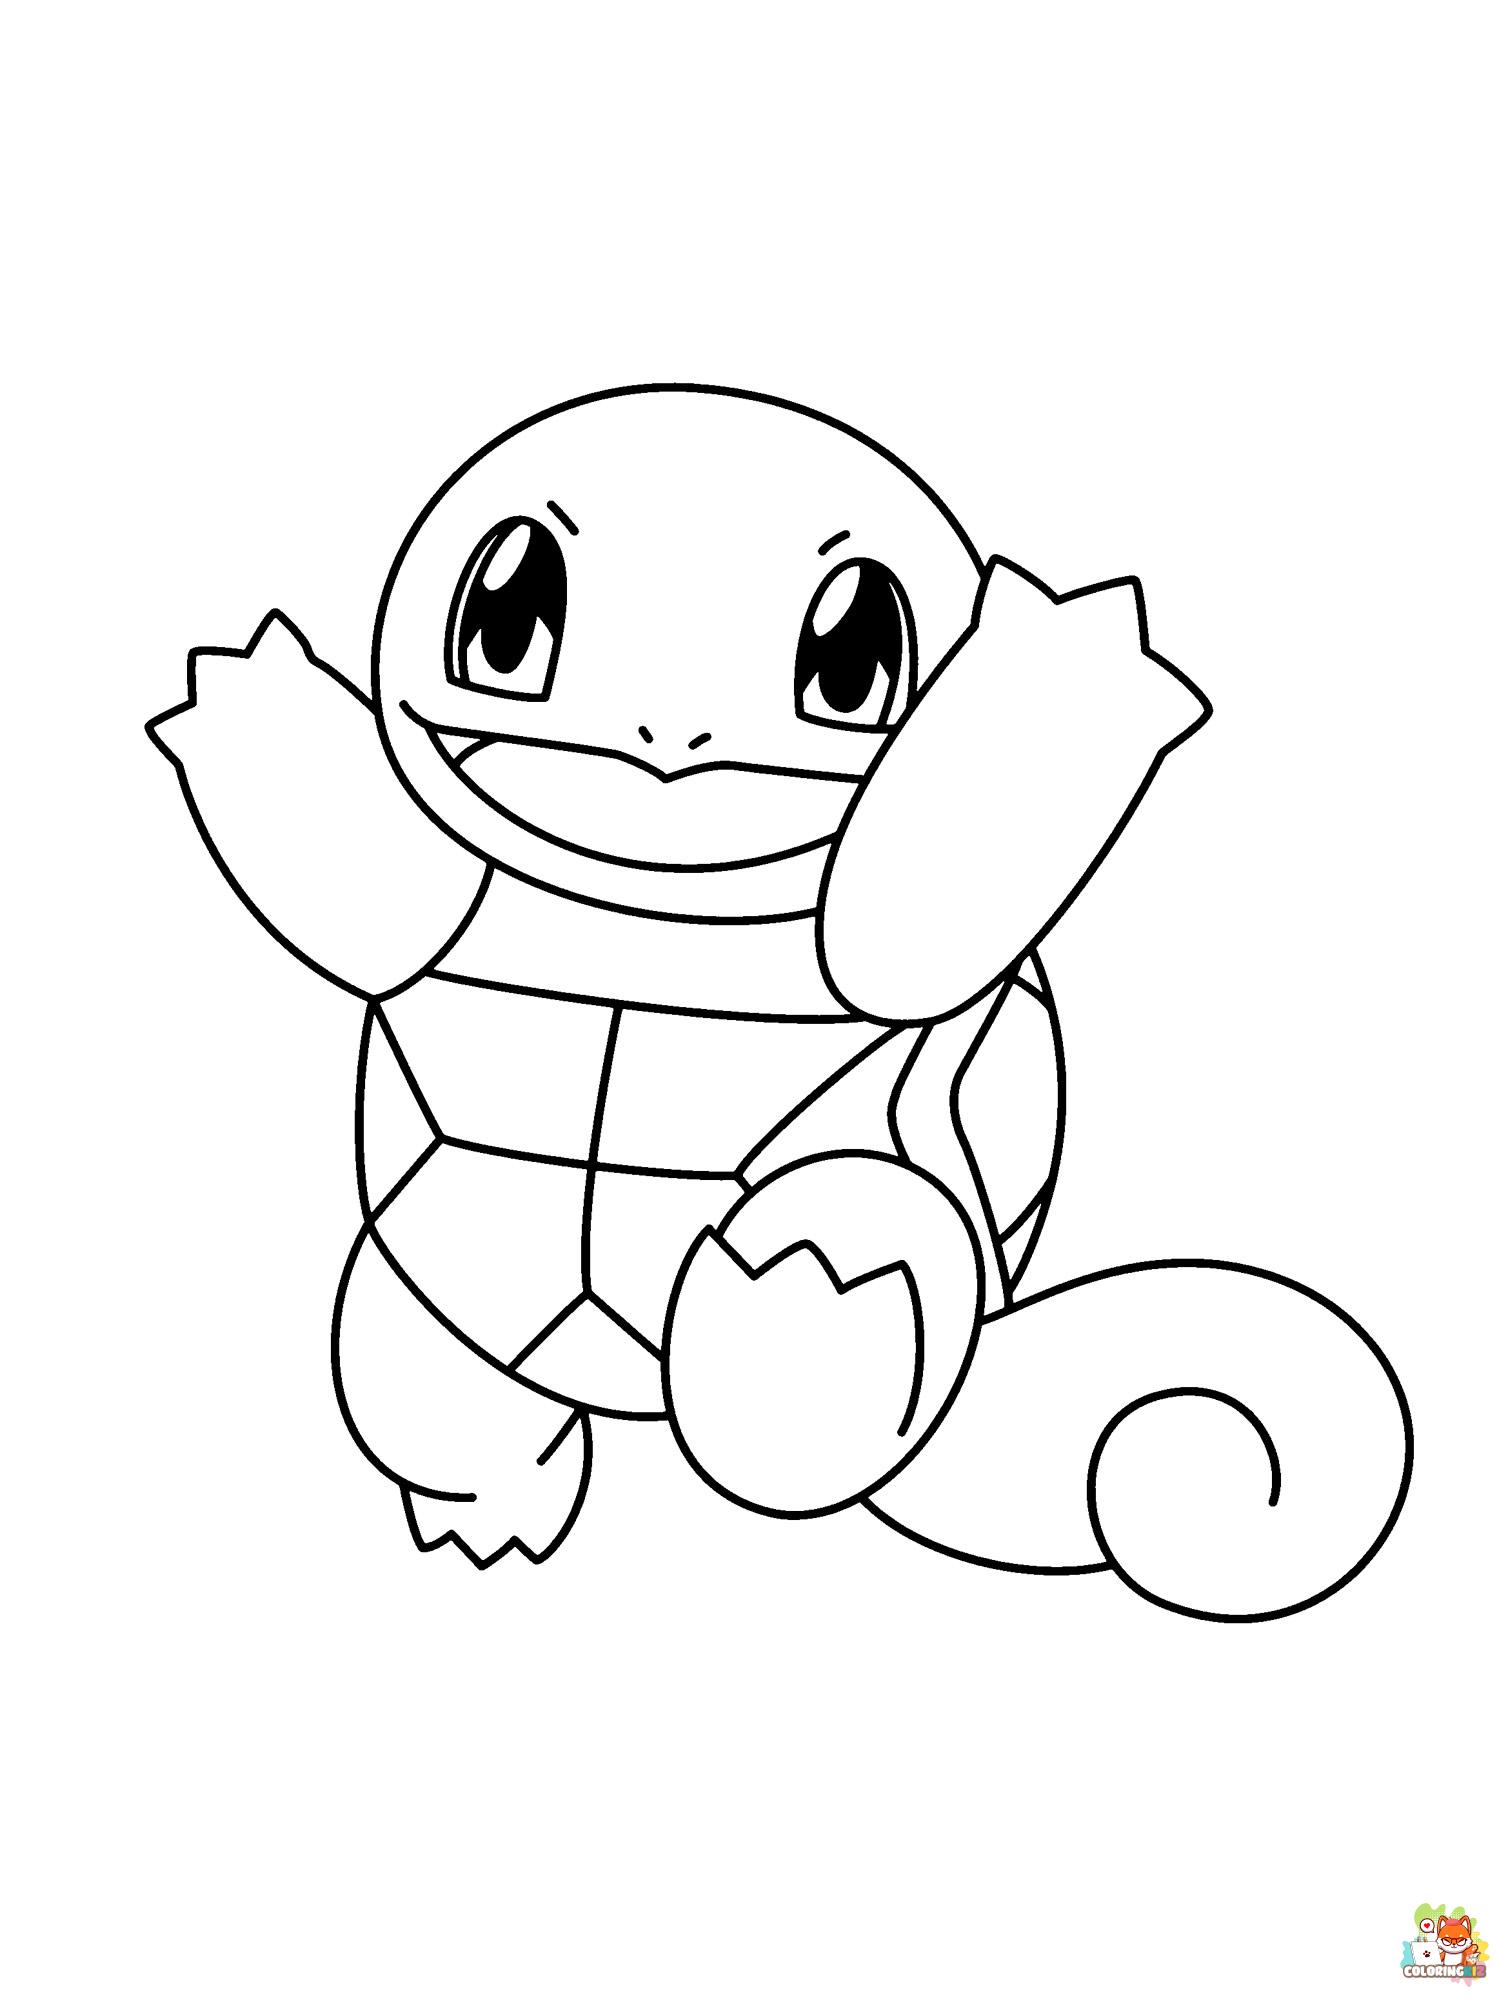 Squirtle Coloring Pages easy 1